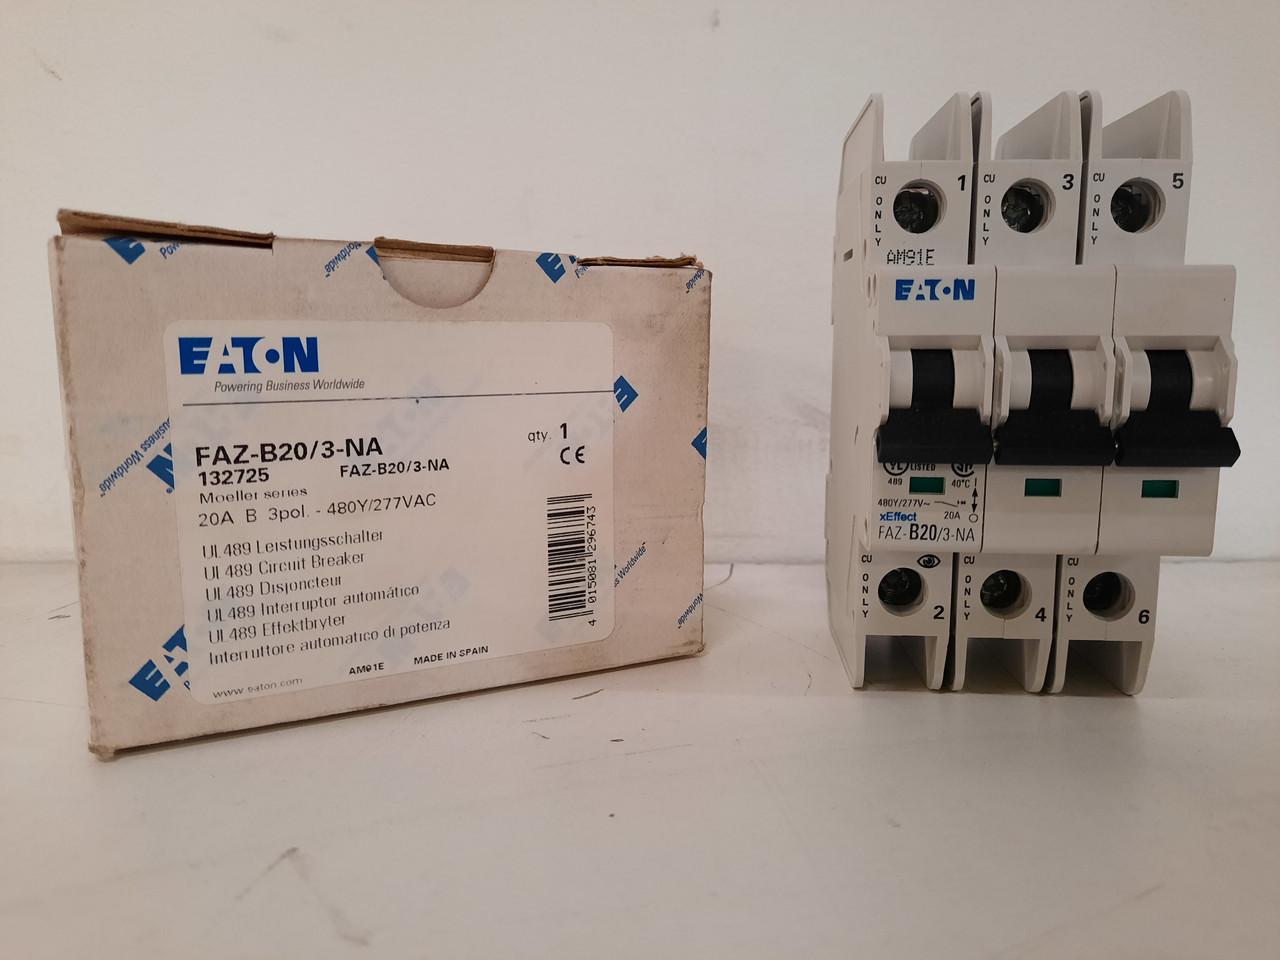 Eaton FAZ-B20/3-NA 277/480 VAC 50/60 Hz, 20 A, 3-Pole, 10/14 kA, 3 to 5 x Rated Current, Screw Terminal, DIN Rail Mount, Standard Packaging, B-Curve, Current Limiting, Thermal Magnetic